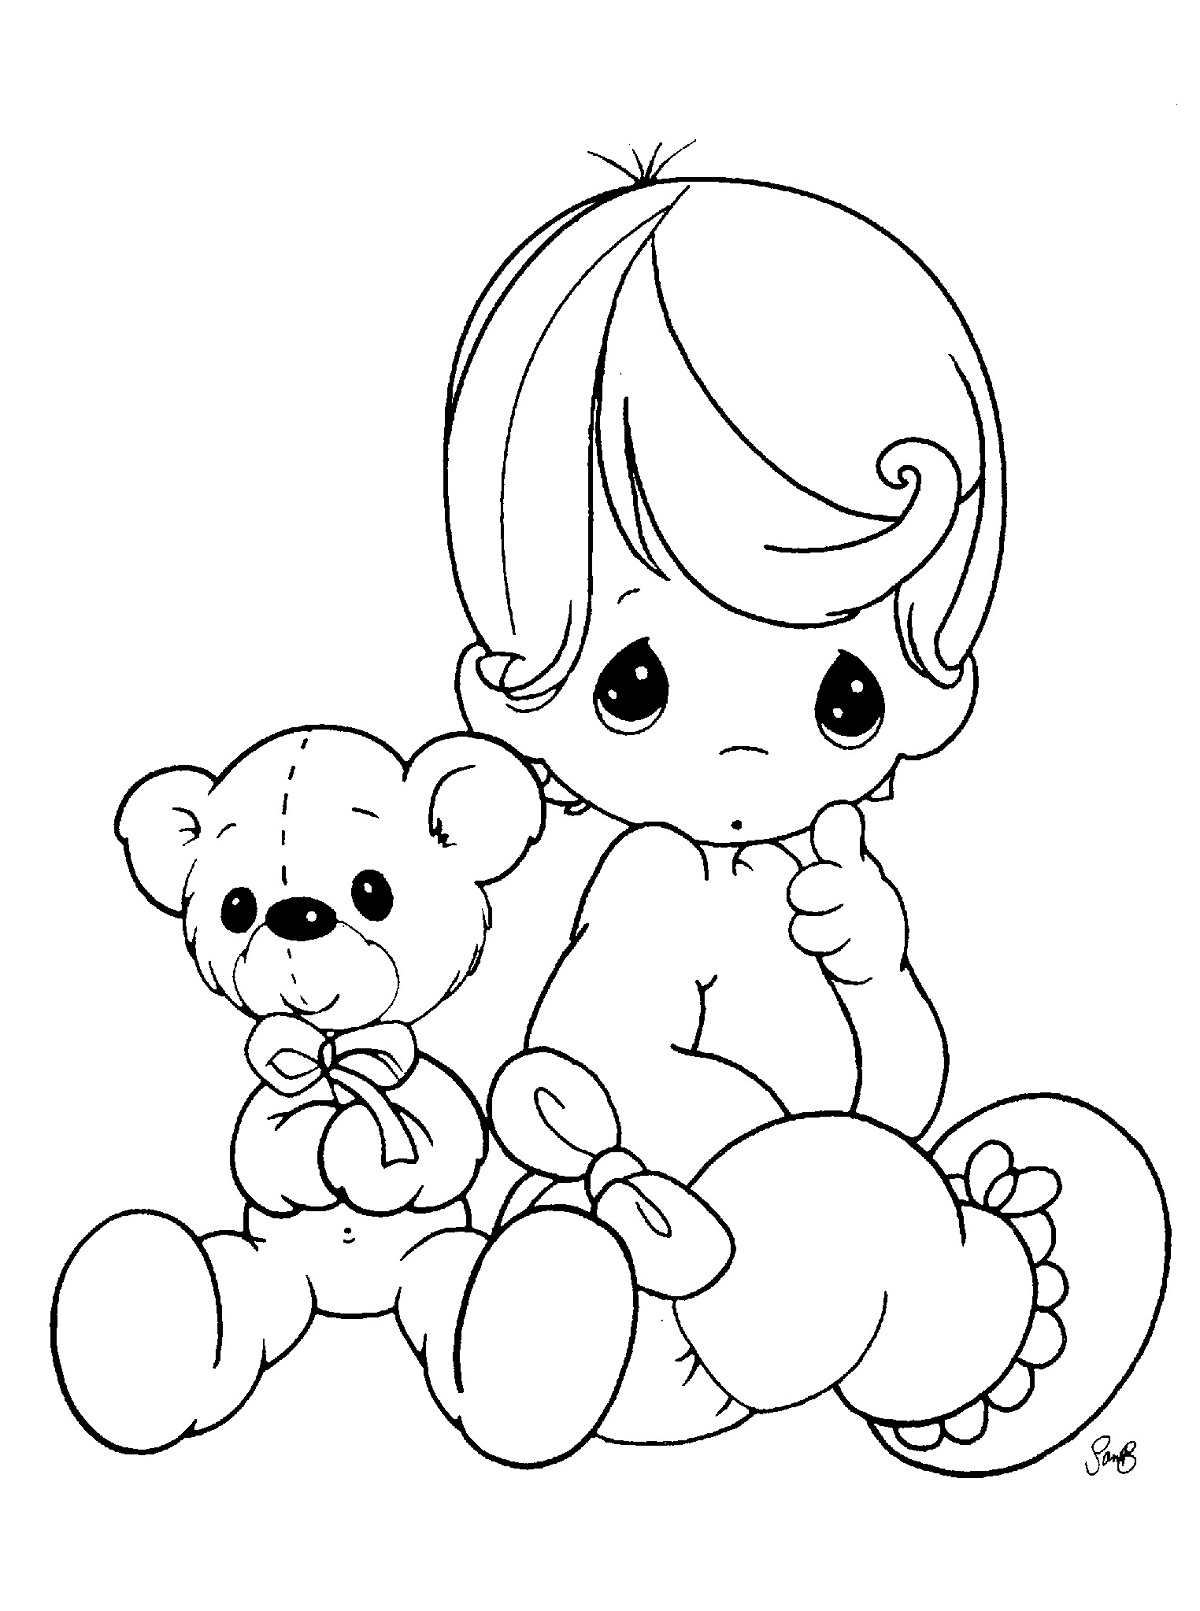 Download Free Printable Baby Coloring Pages For Kids